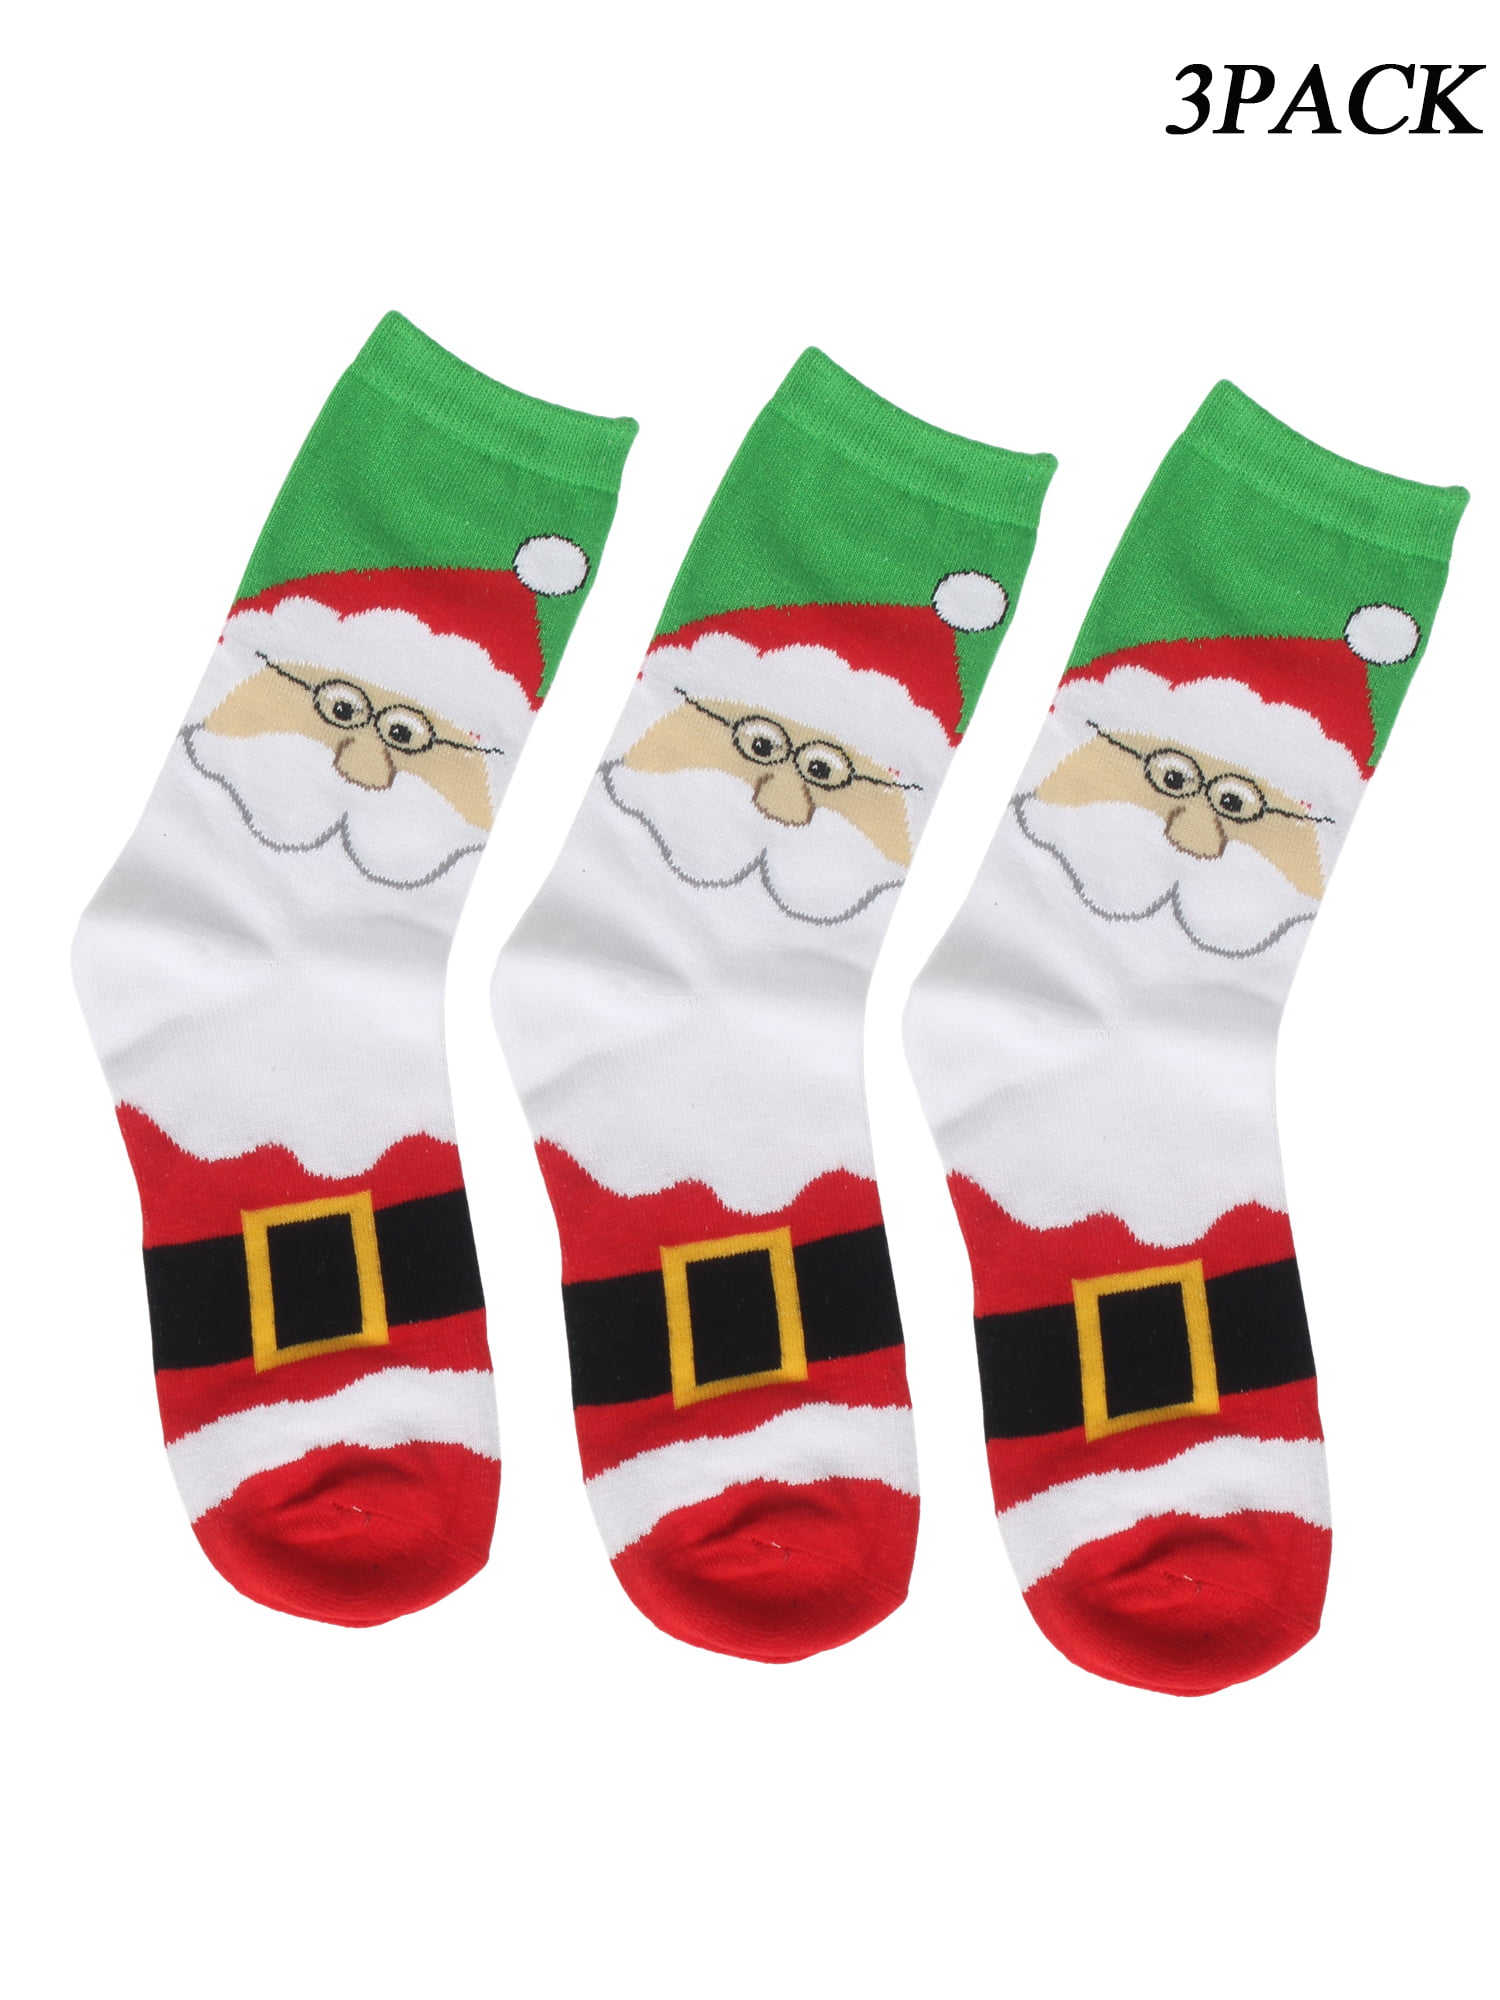 Cotton Blend 6 pairs ages 1-3 years Festive Feet Christmas toddler Socks